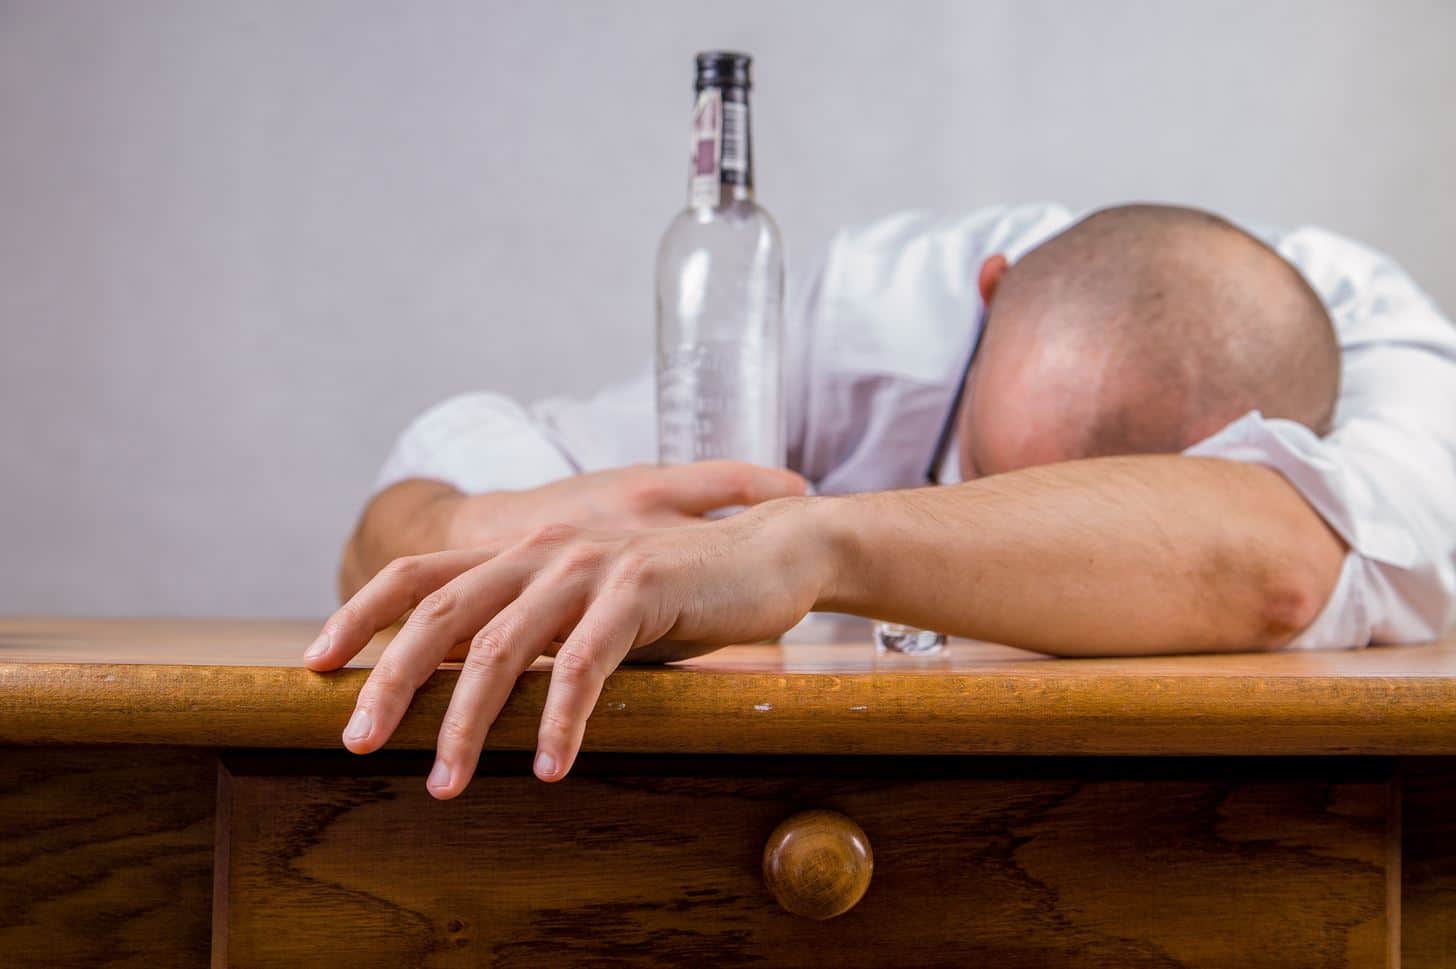 4 Ways to Avoid Alcohol and Make Yourself Healthier and More Happier